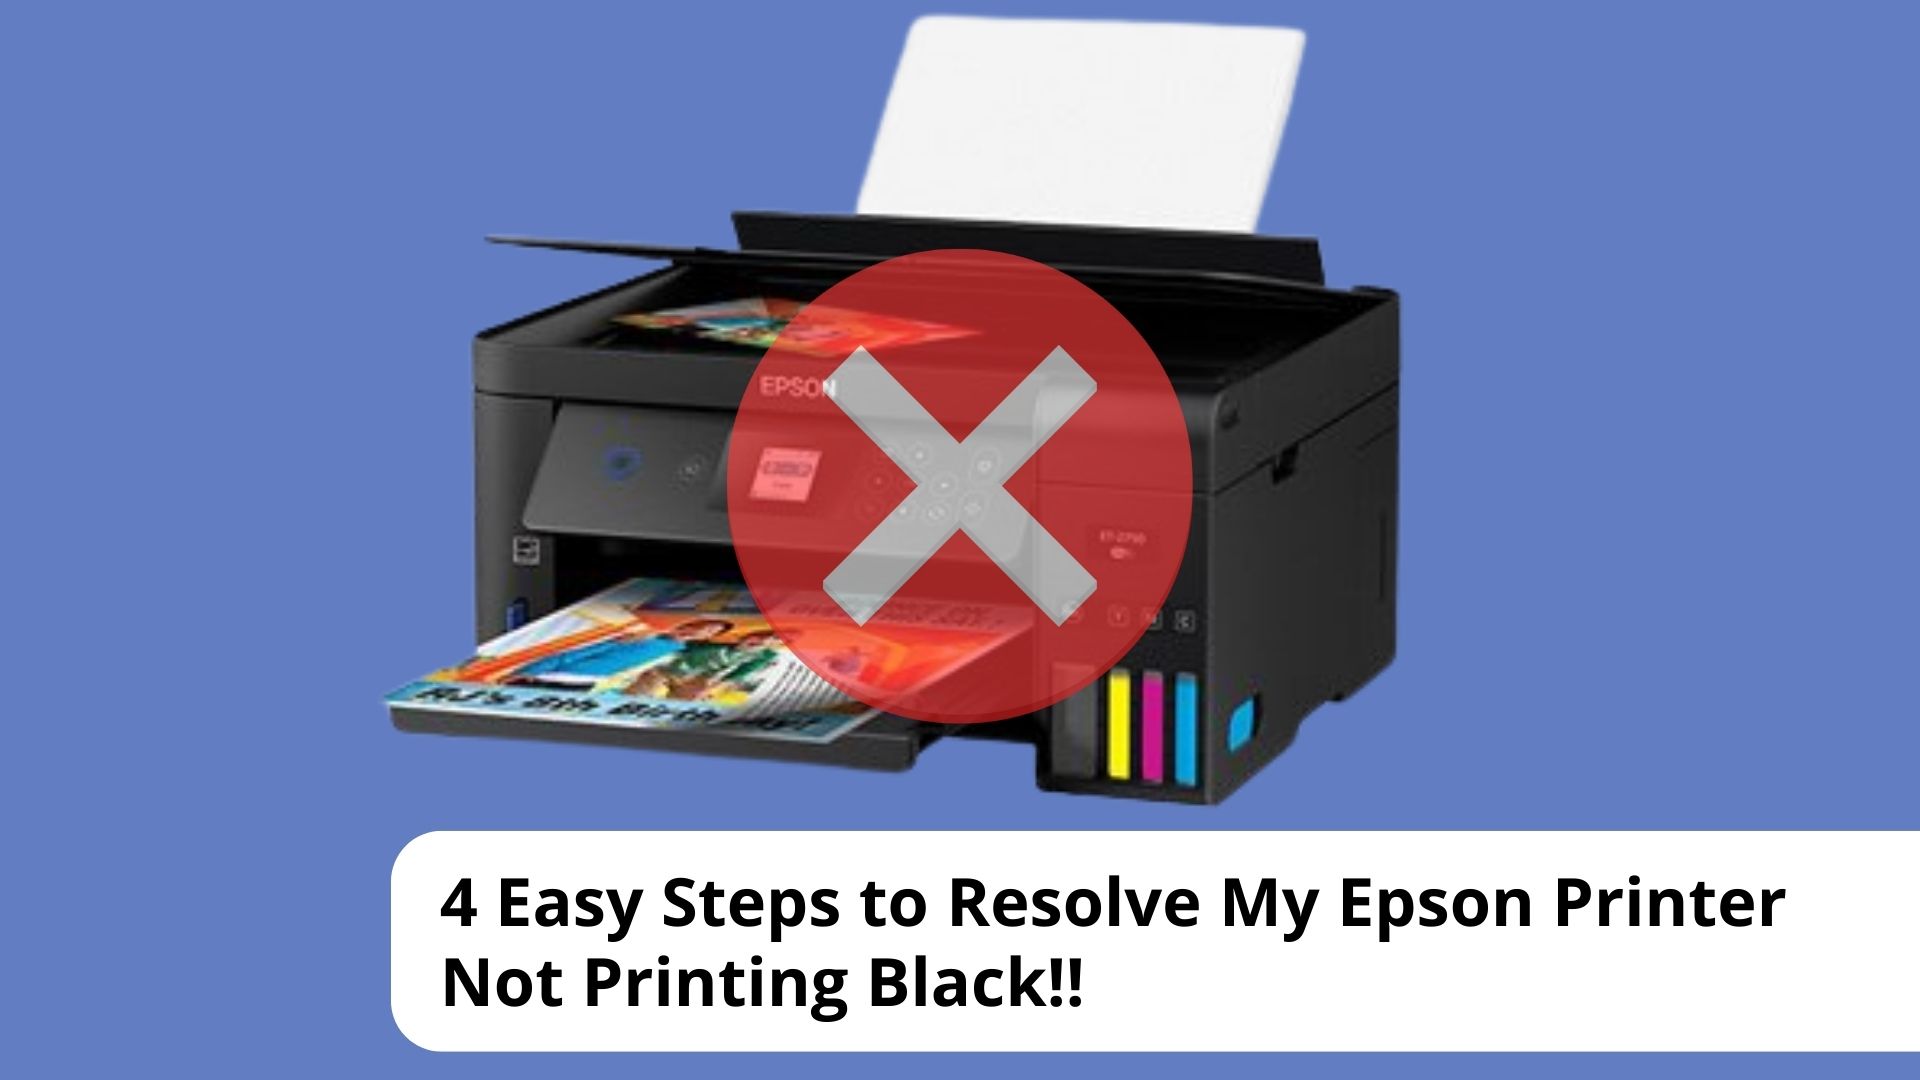 4 Easy Things You Can Try To Resolve Your Epson Printer From Not Printing Black